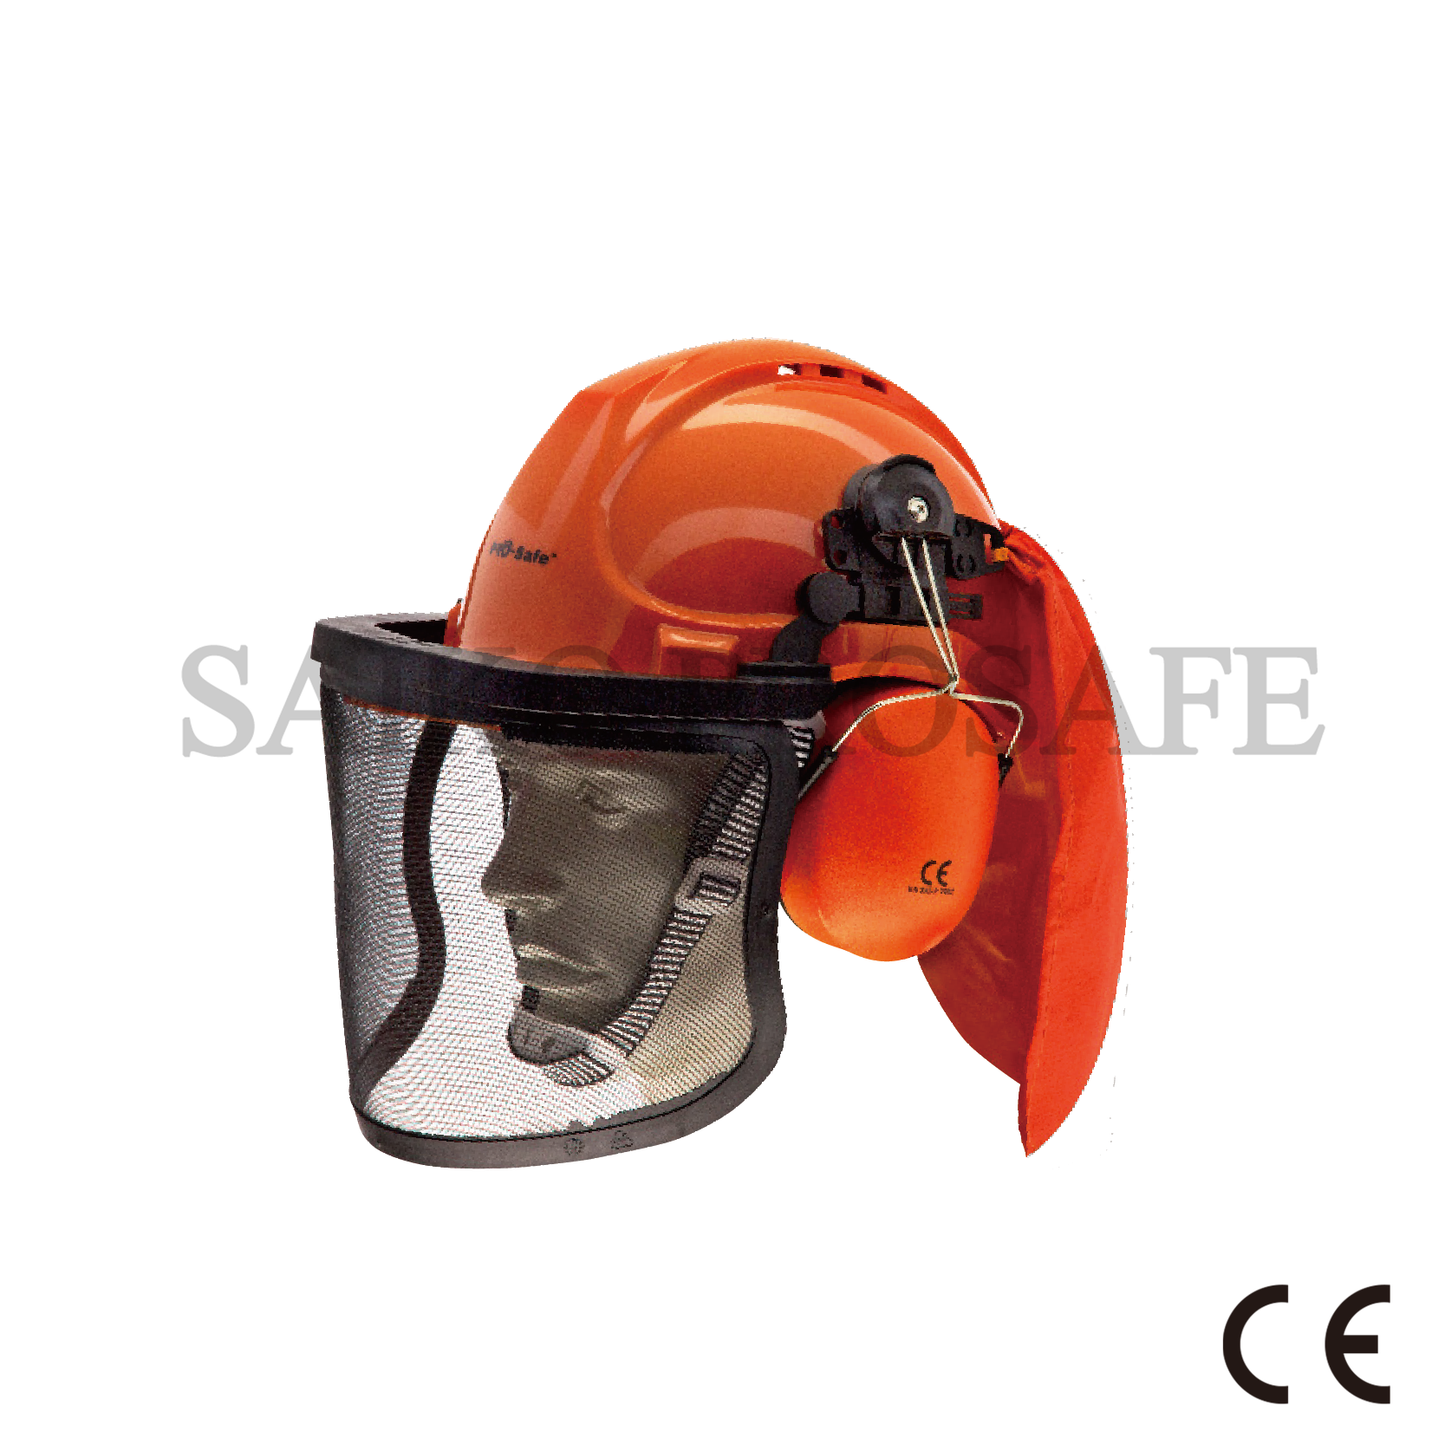 Safety Helmet with Face Shield -  mesh visor and earmuffs- KM1504112